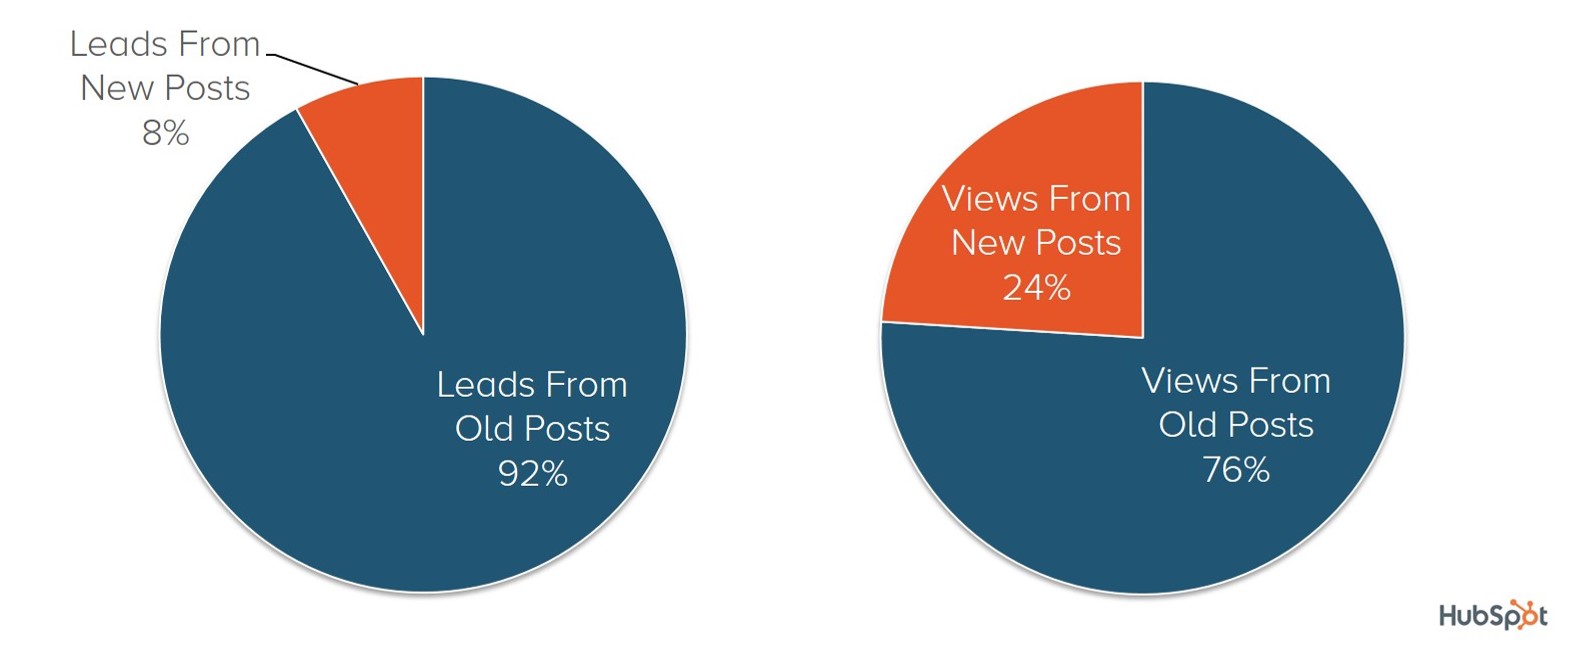 old posts leads traffic